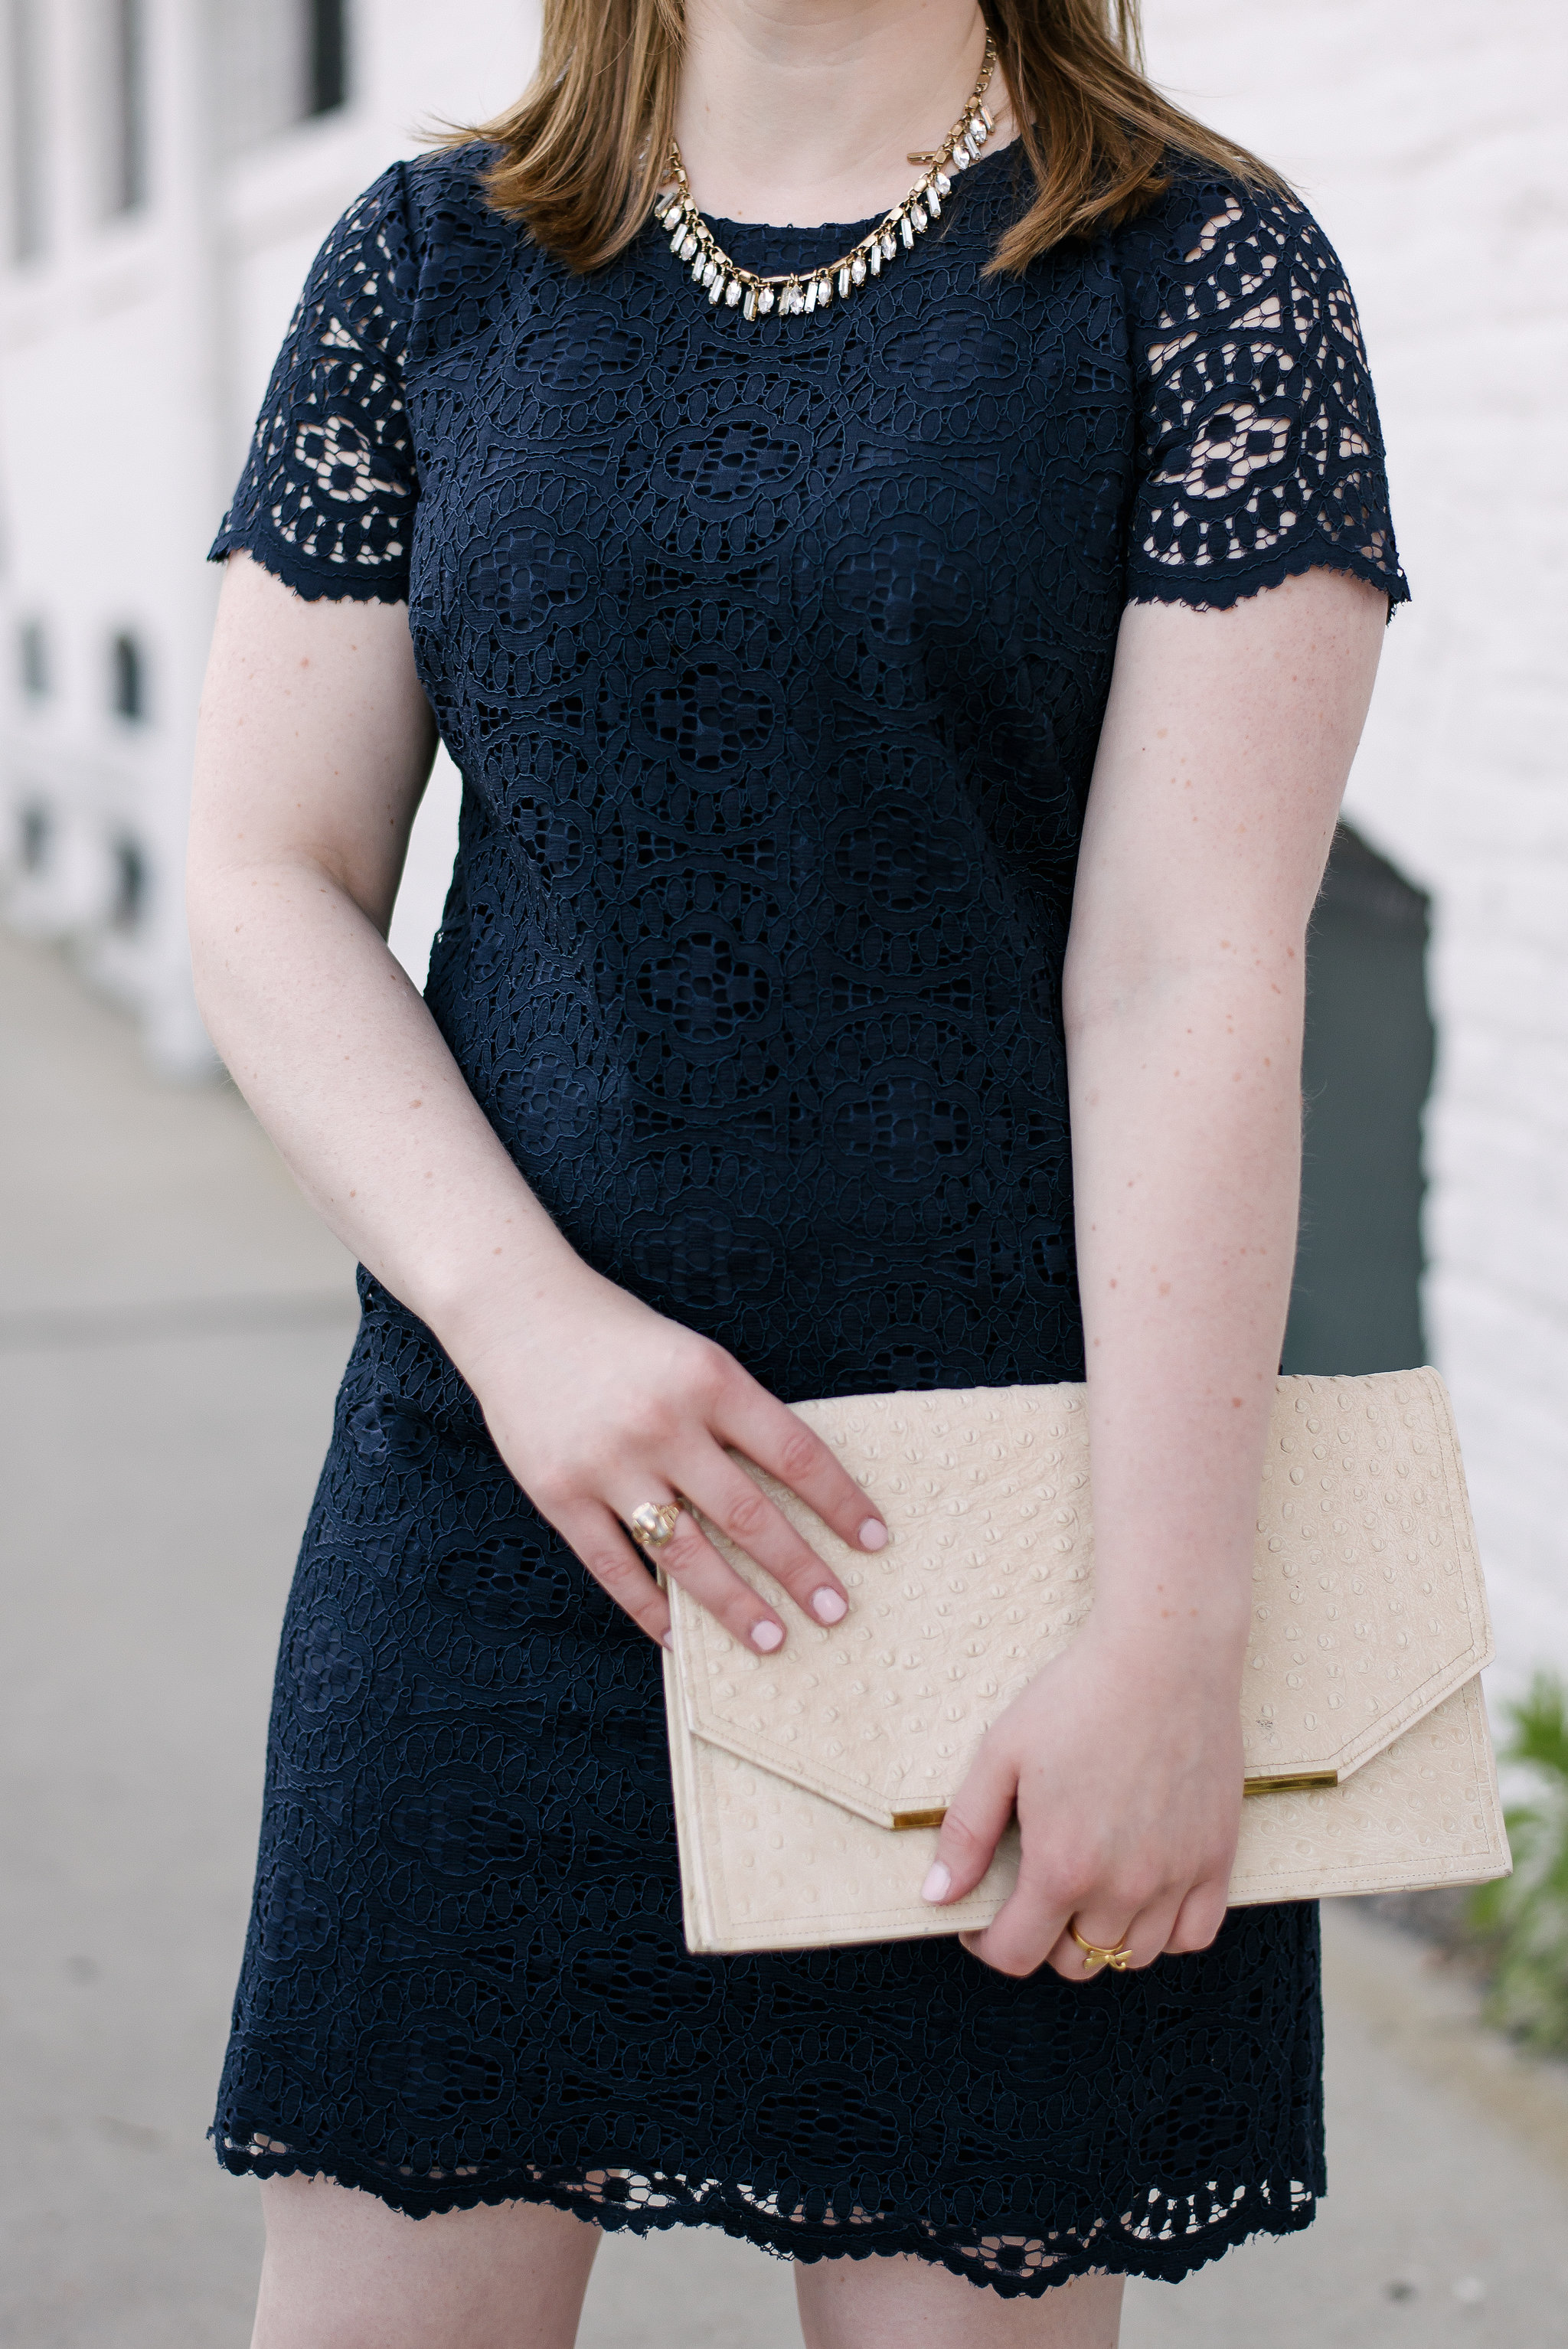 The Best Dresses to Wear to a Wedding | Something Good, @danaerinw , navy lace dress, women's fashion, women's dress, women's style, wedding styles, wedding guest dress